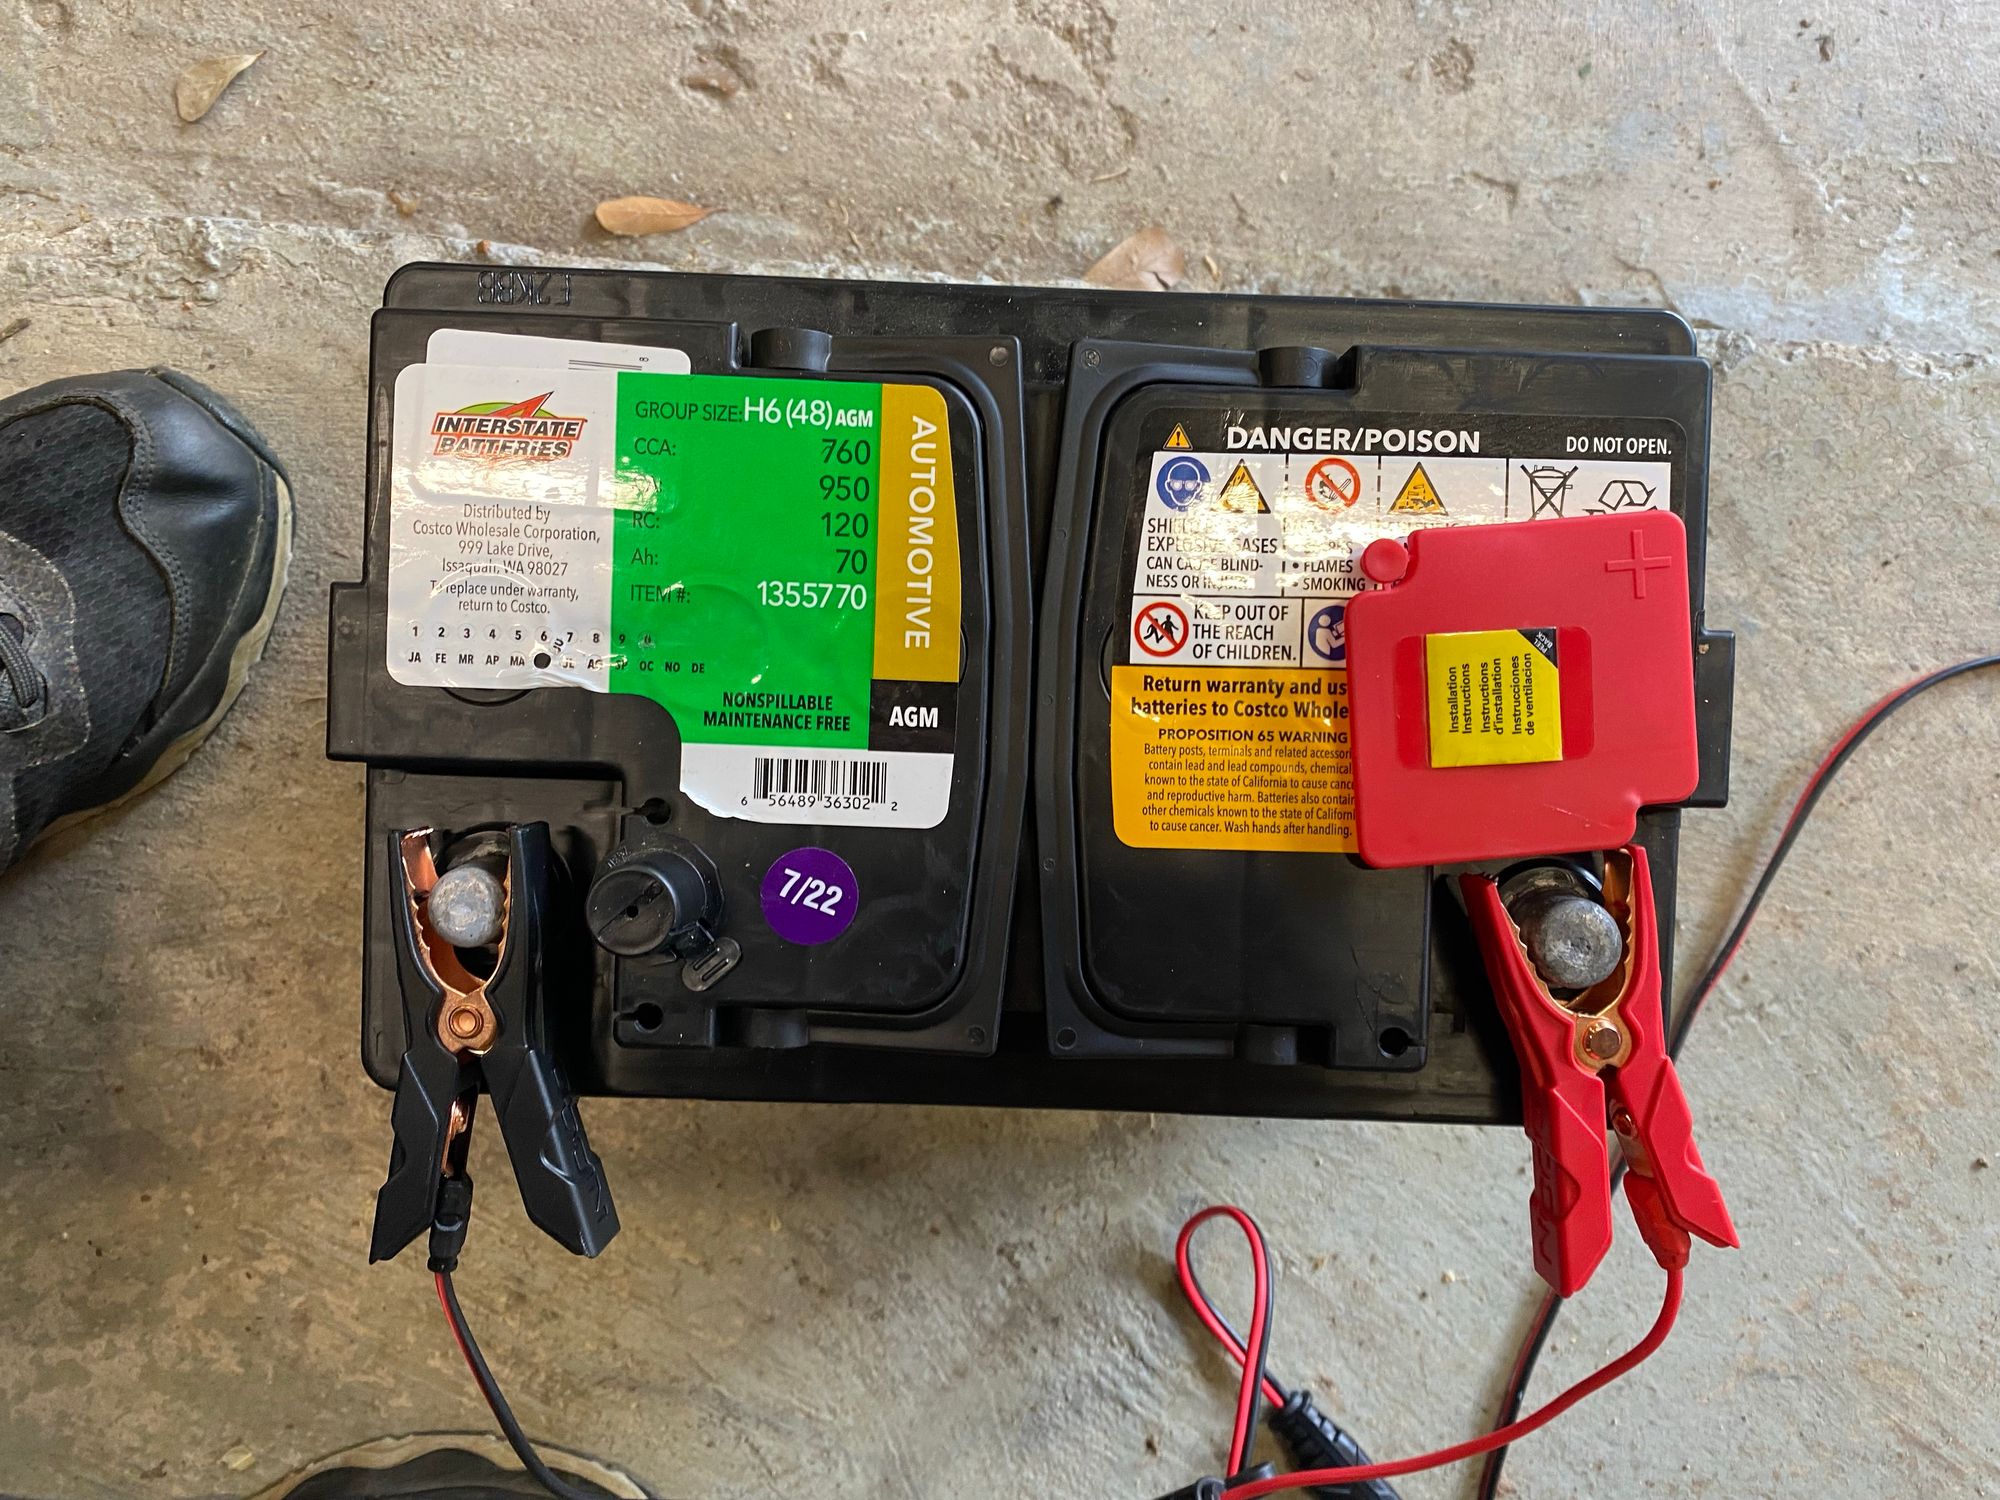 Replacing and Upgrading the 12v battery in my Generac RG027